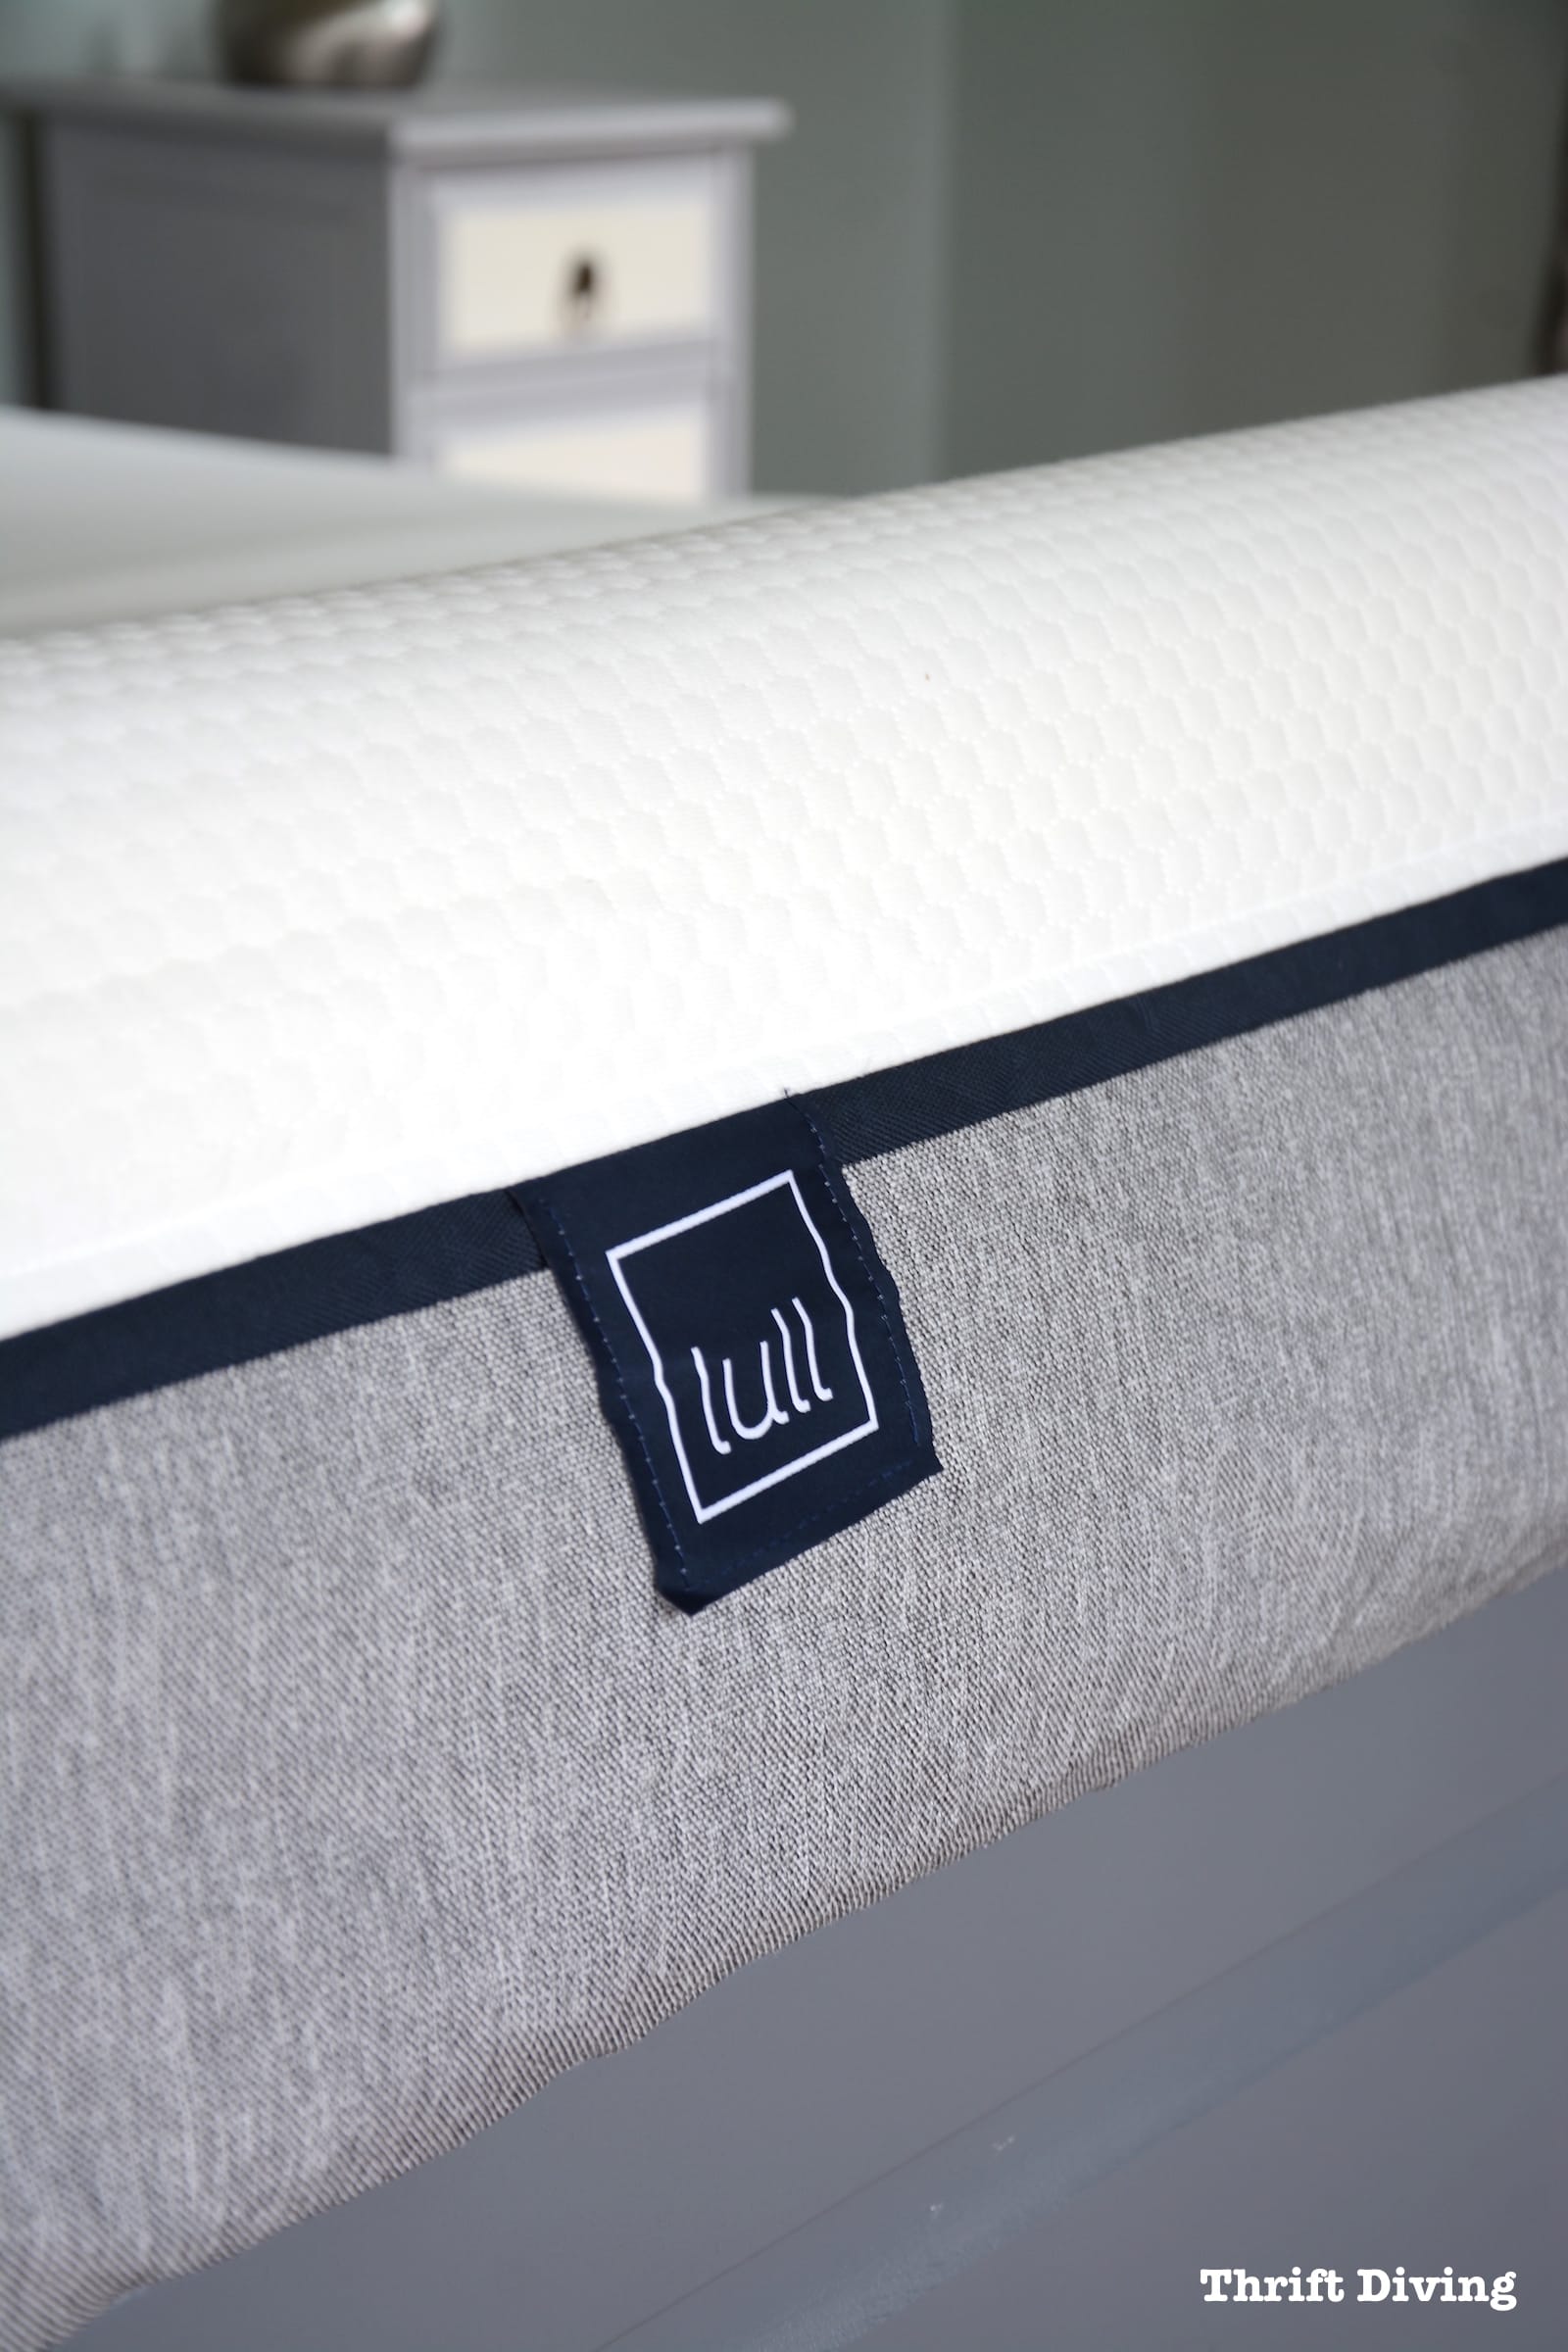 Lull Mattress Review and painted IKEA bed frame - AFTER - Lull mattress cover is gray and white with dark blue trim. - Thrift Diving